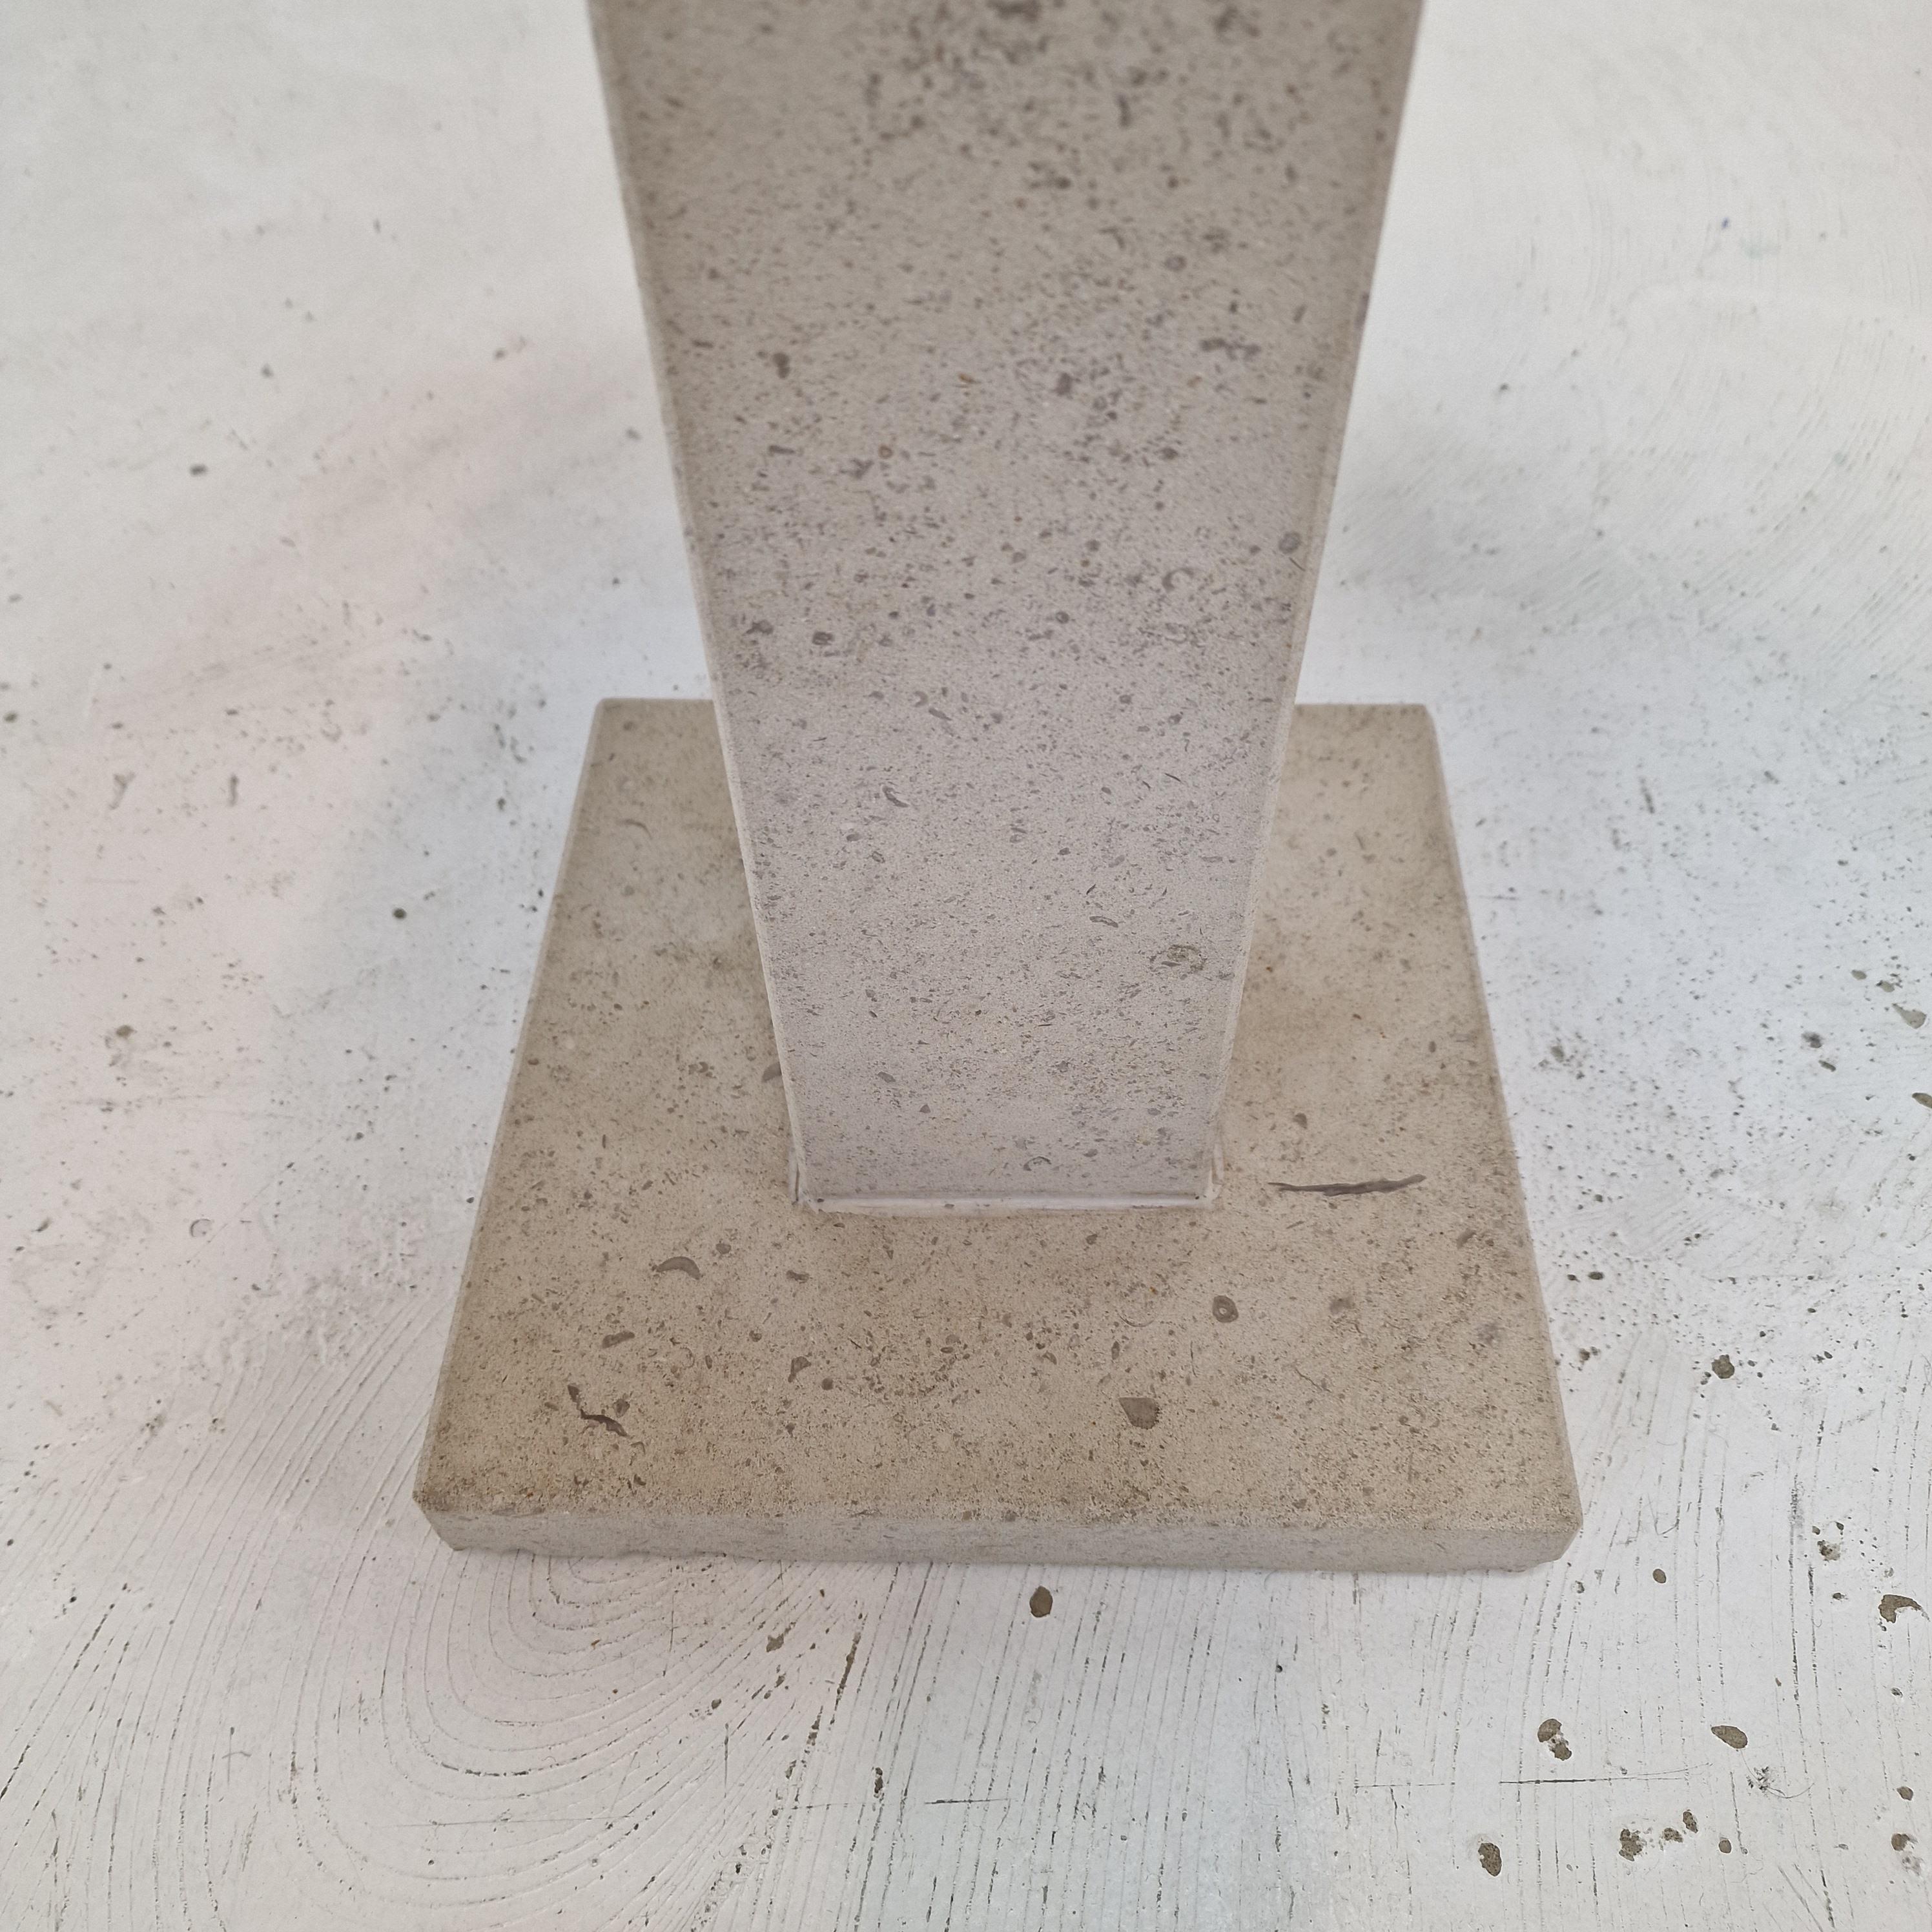 Set of 2 Italian Travertine or Stone Pedestals or Side Tables, 1980s For Sale 8